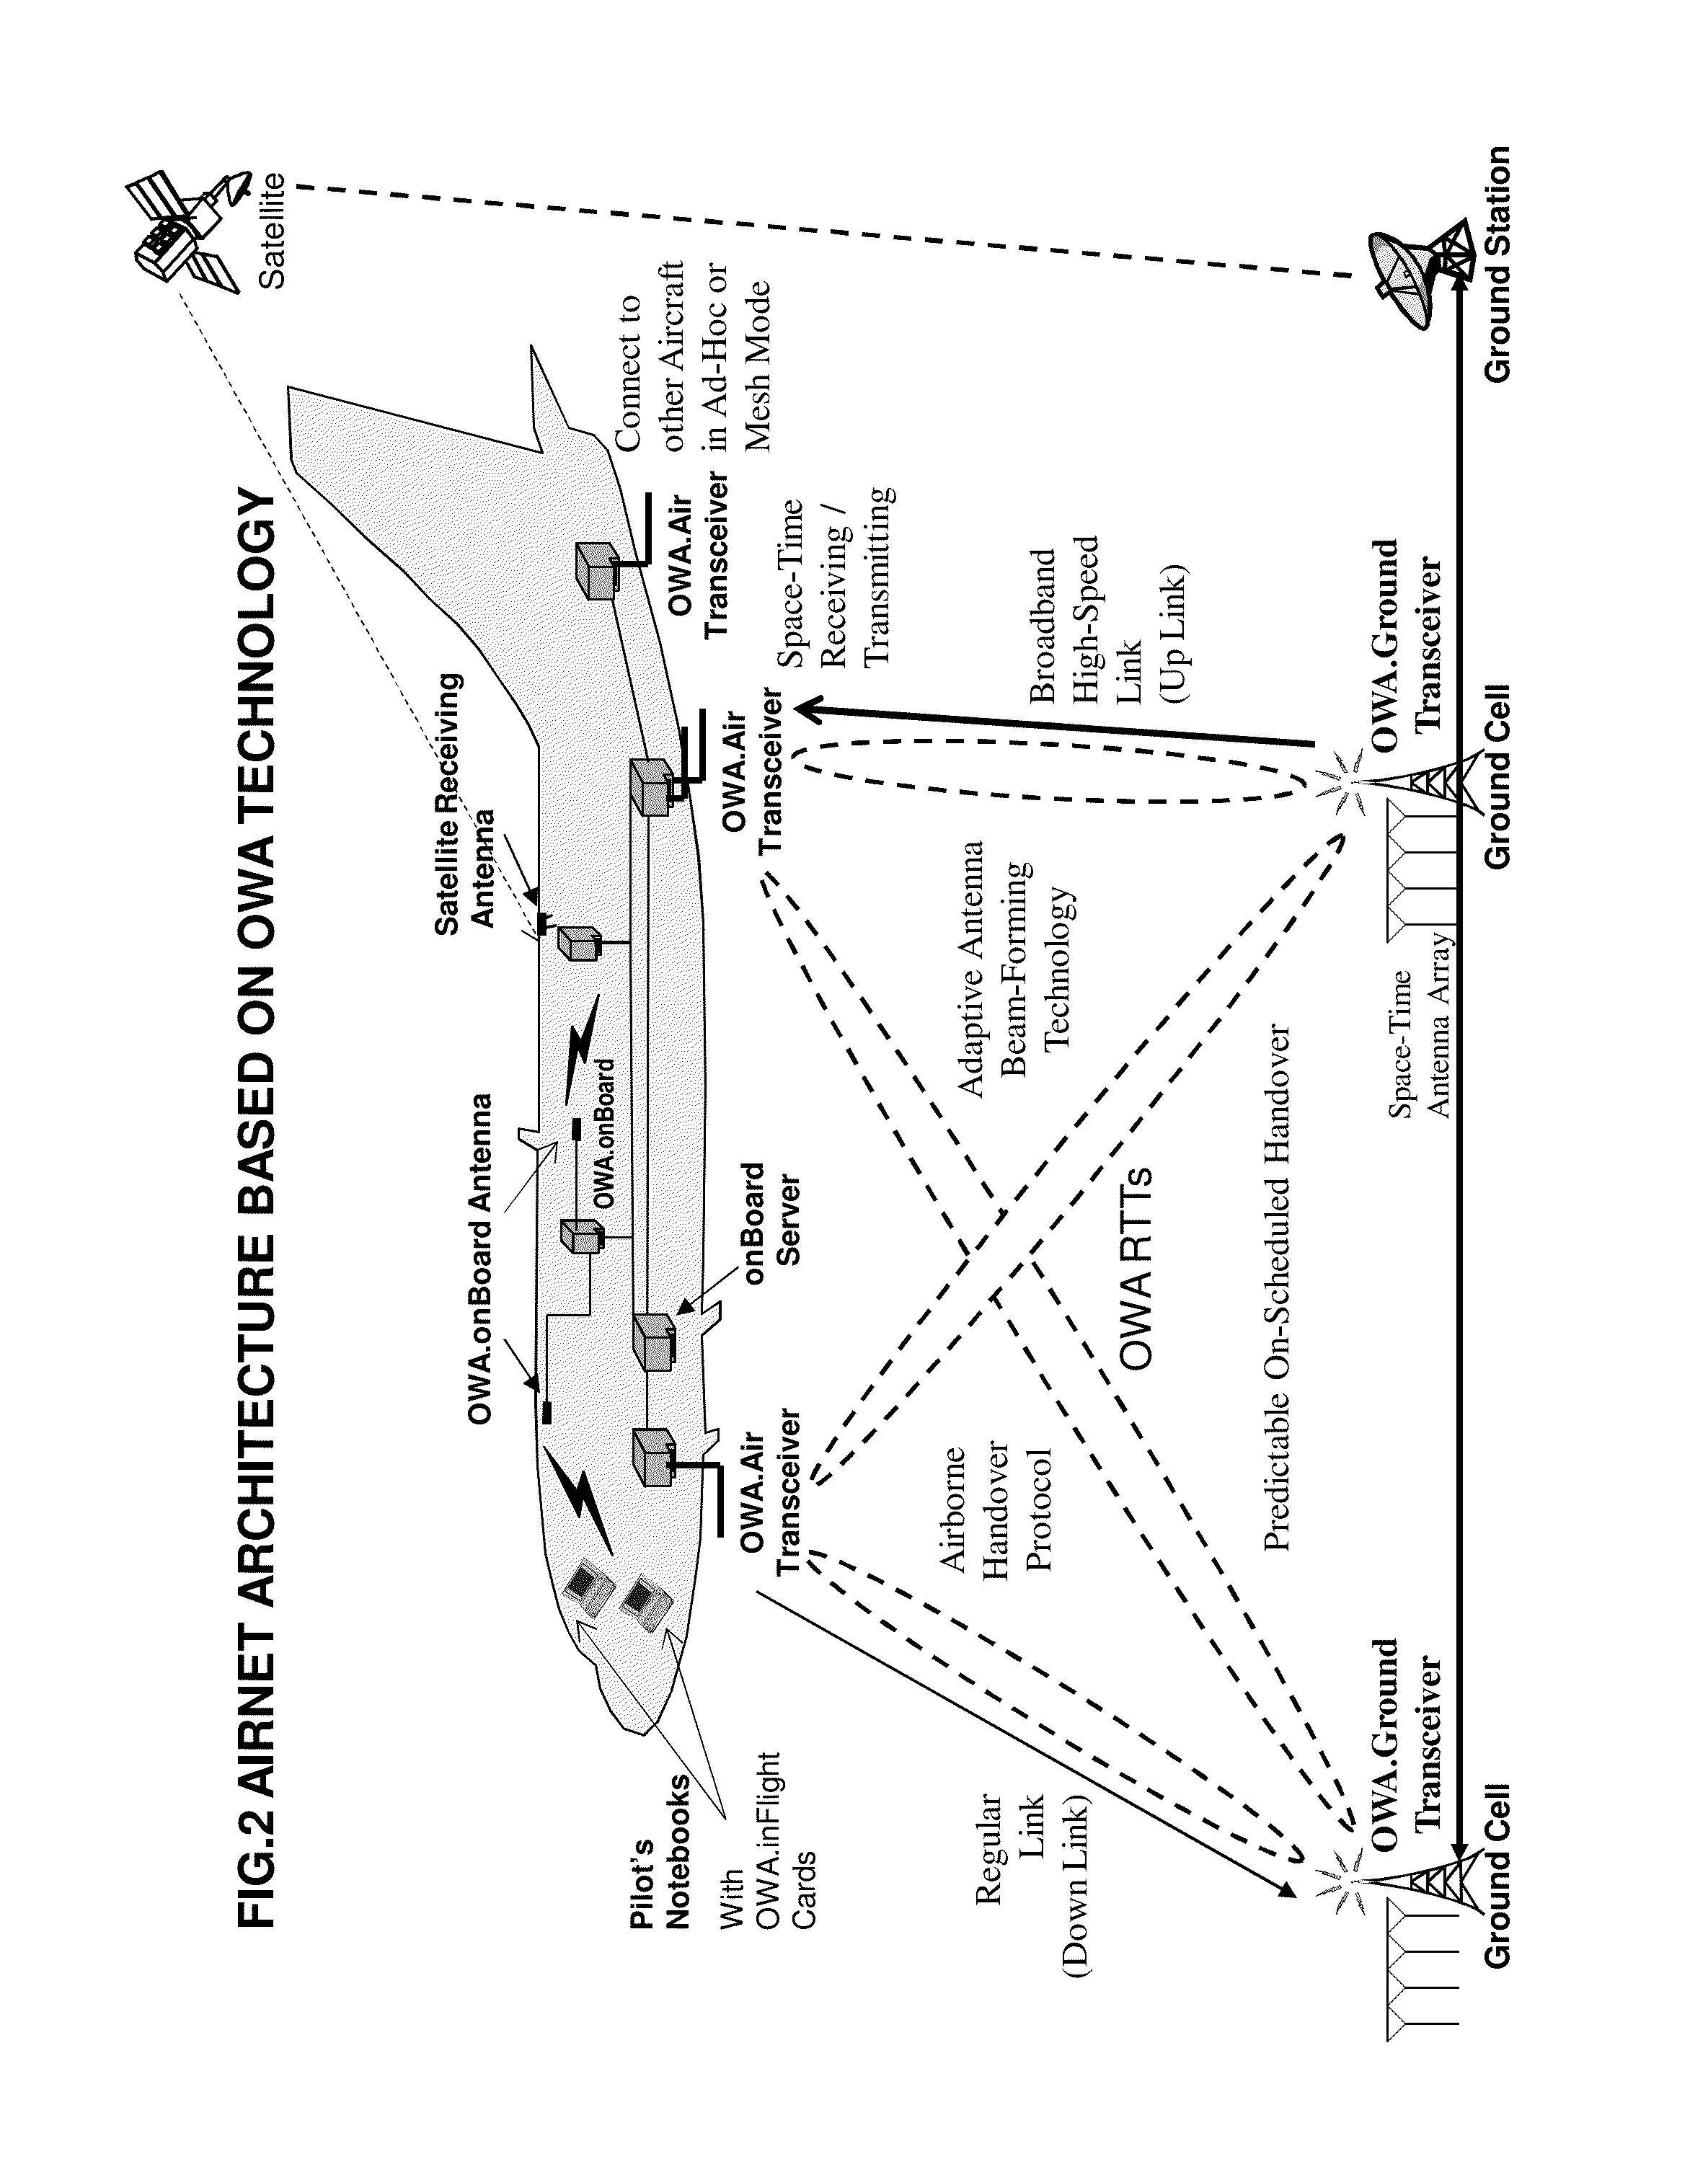 Open wireless architecture (OWA) unified airborne and terrestrial communications architecture